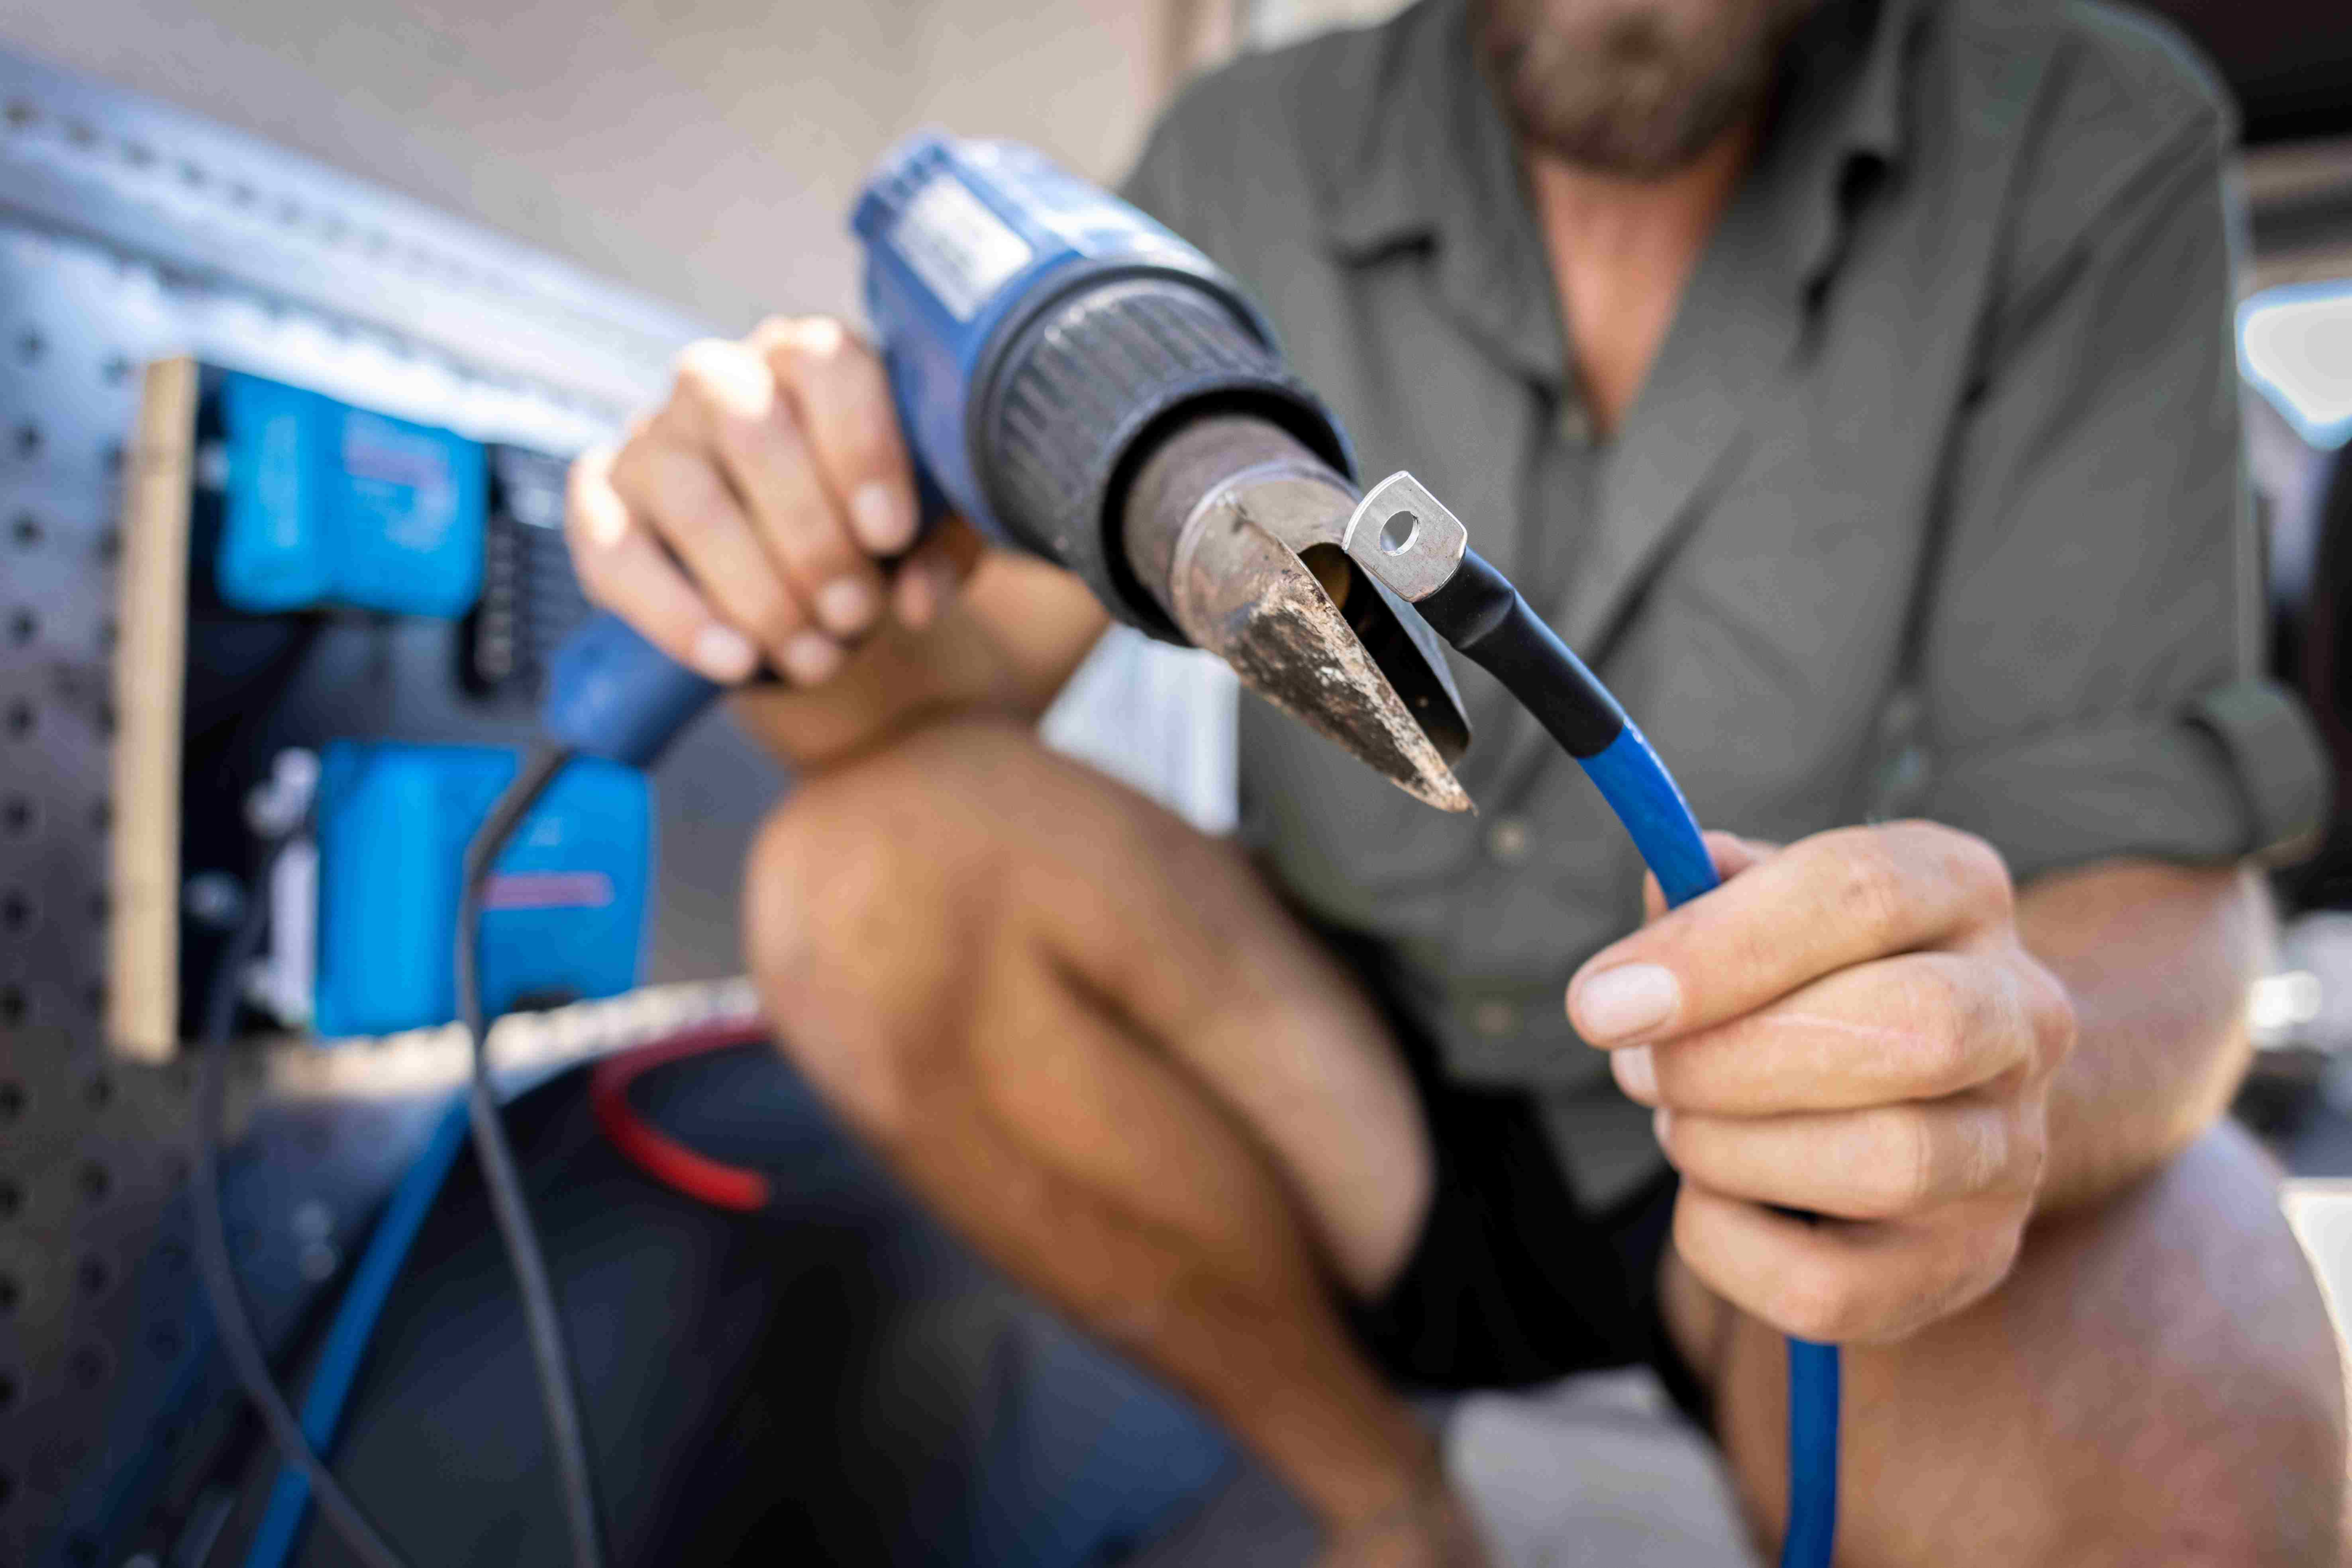 Man uses heat-shrink tubing on an electrical cable for camper conversion